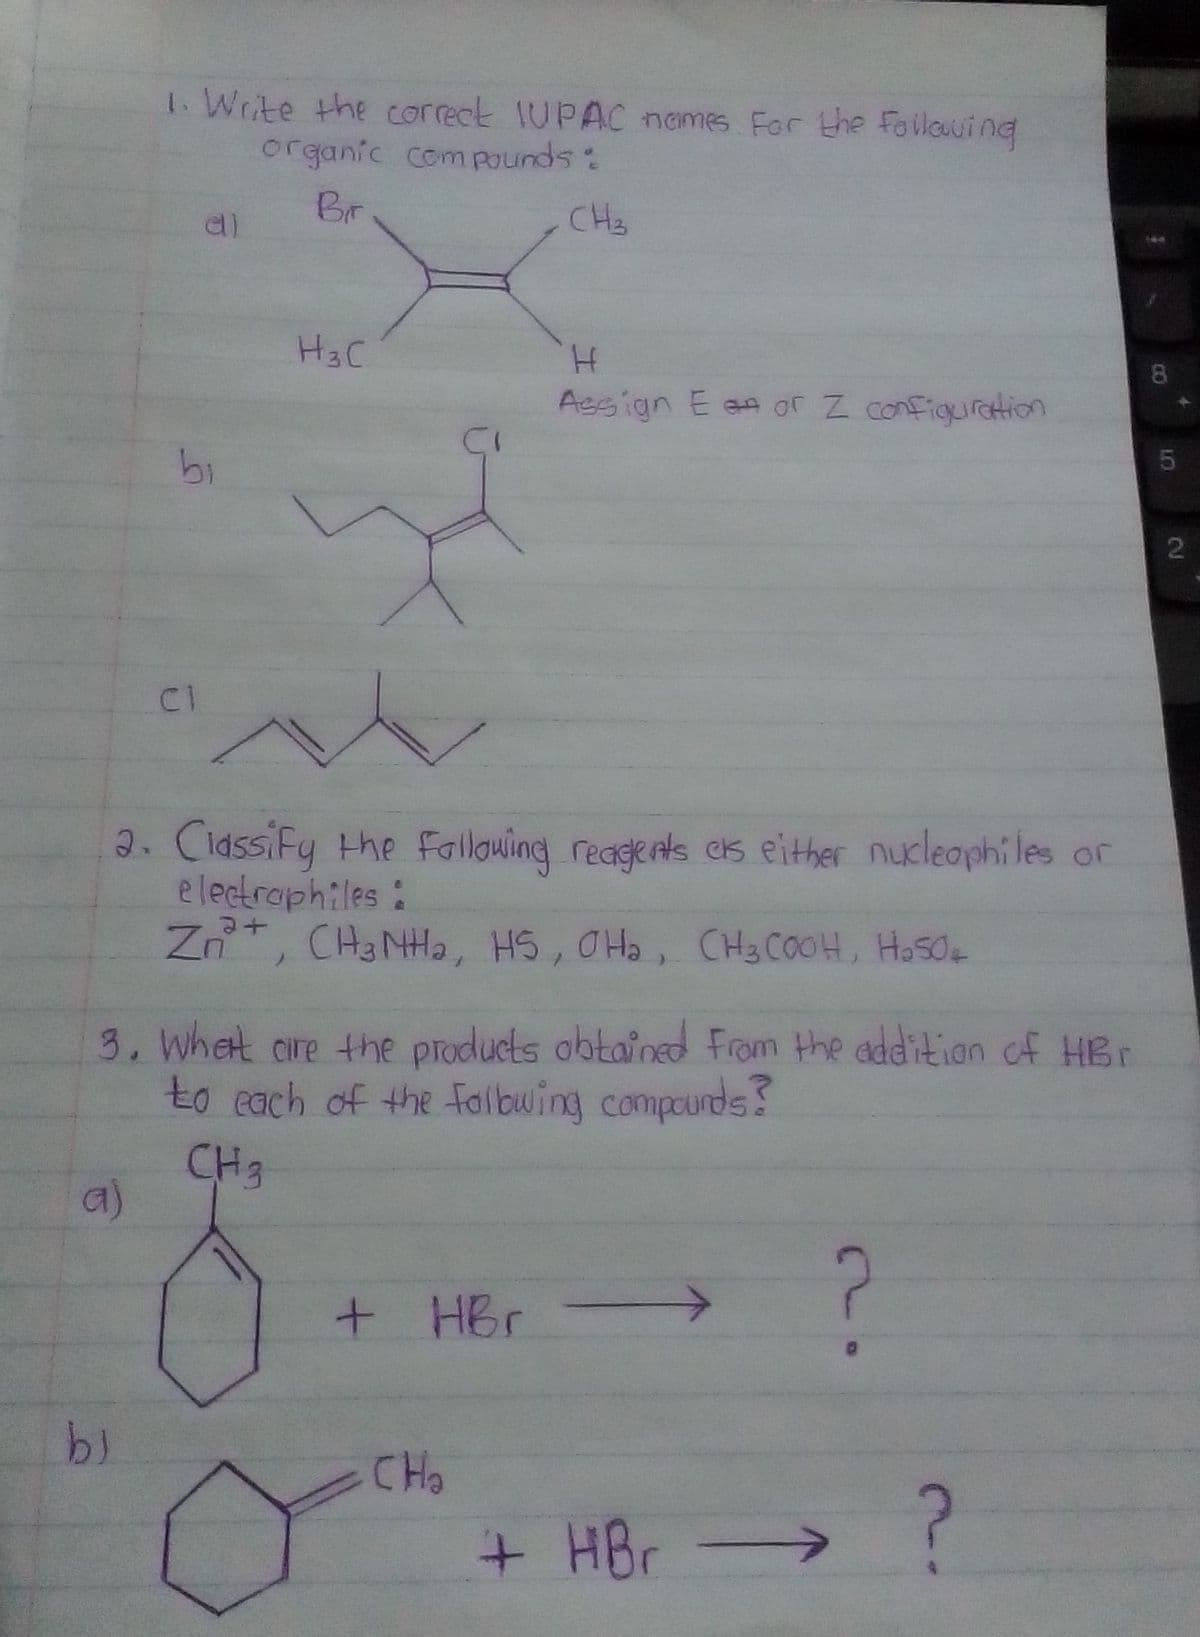 1. Write the correck IUPAC nemes Far the Foilawing
organic comPounds:
Br
CH3
H3C
8.
Assign E an or Z configuration
bi
CI
2. CidssiFy the Following reagents cs either nucleaphiles or
e lectraph:les:
Zn, CH3NH2, HS, OHa, CH3COOH, HoSO
3. Whet are the products obtained From the addition of HBr
to each of the falbuing compounds?
CH3
a)
+ HBr >
CHo
+HBr-
2.
